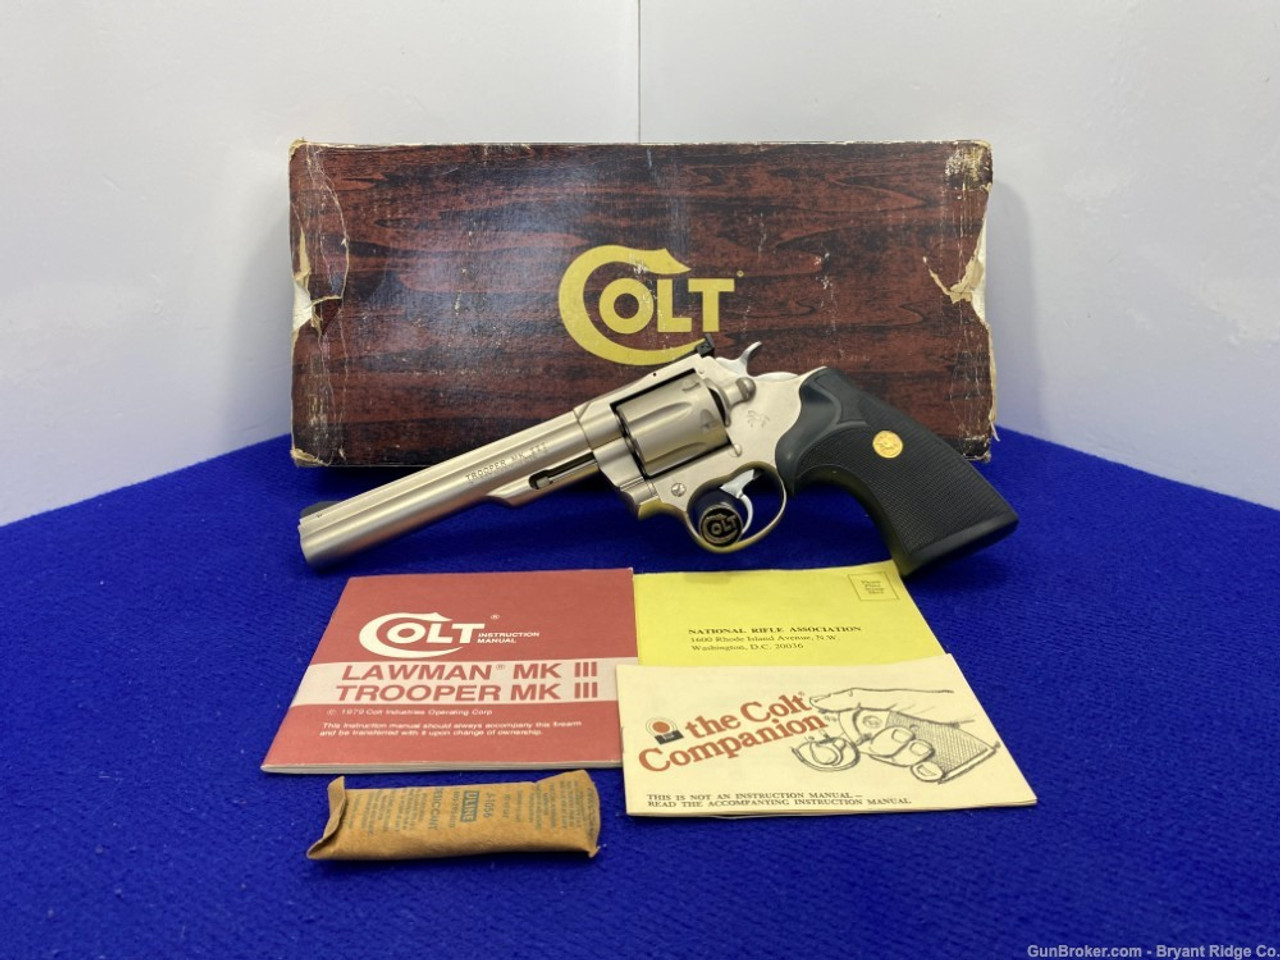 Sold Colt Trooper Mk Iii 357mag 8 Rare And Desirable Electroless Nickel Finish Bryant Ridge 5286